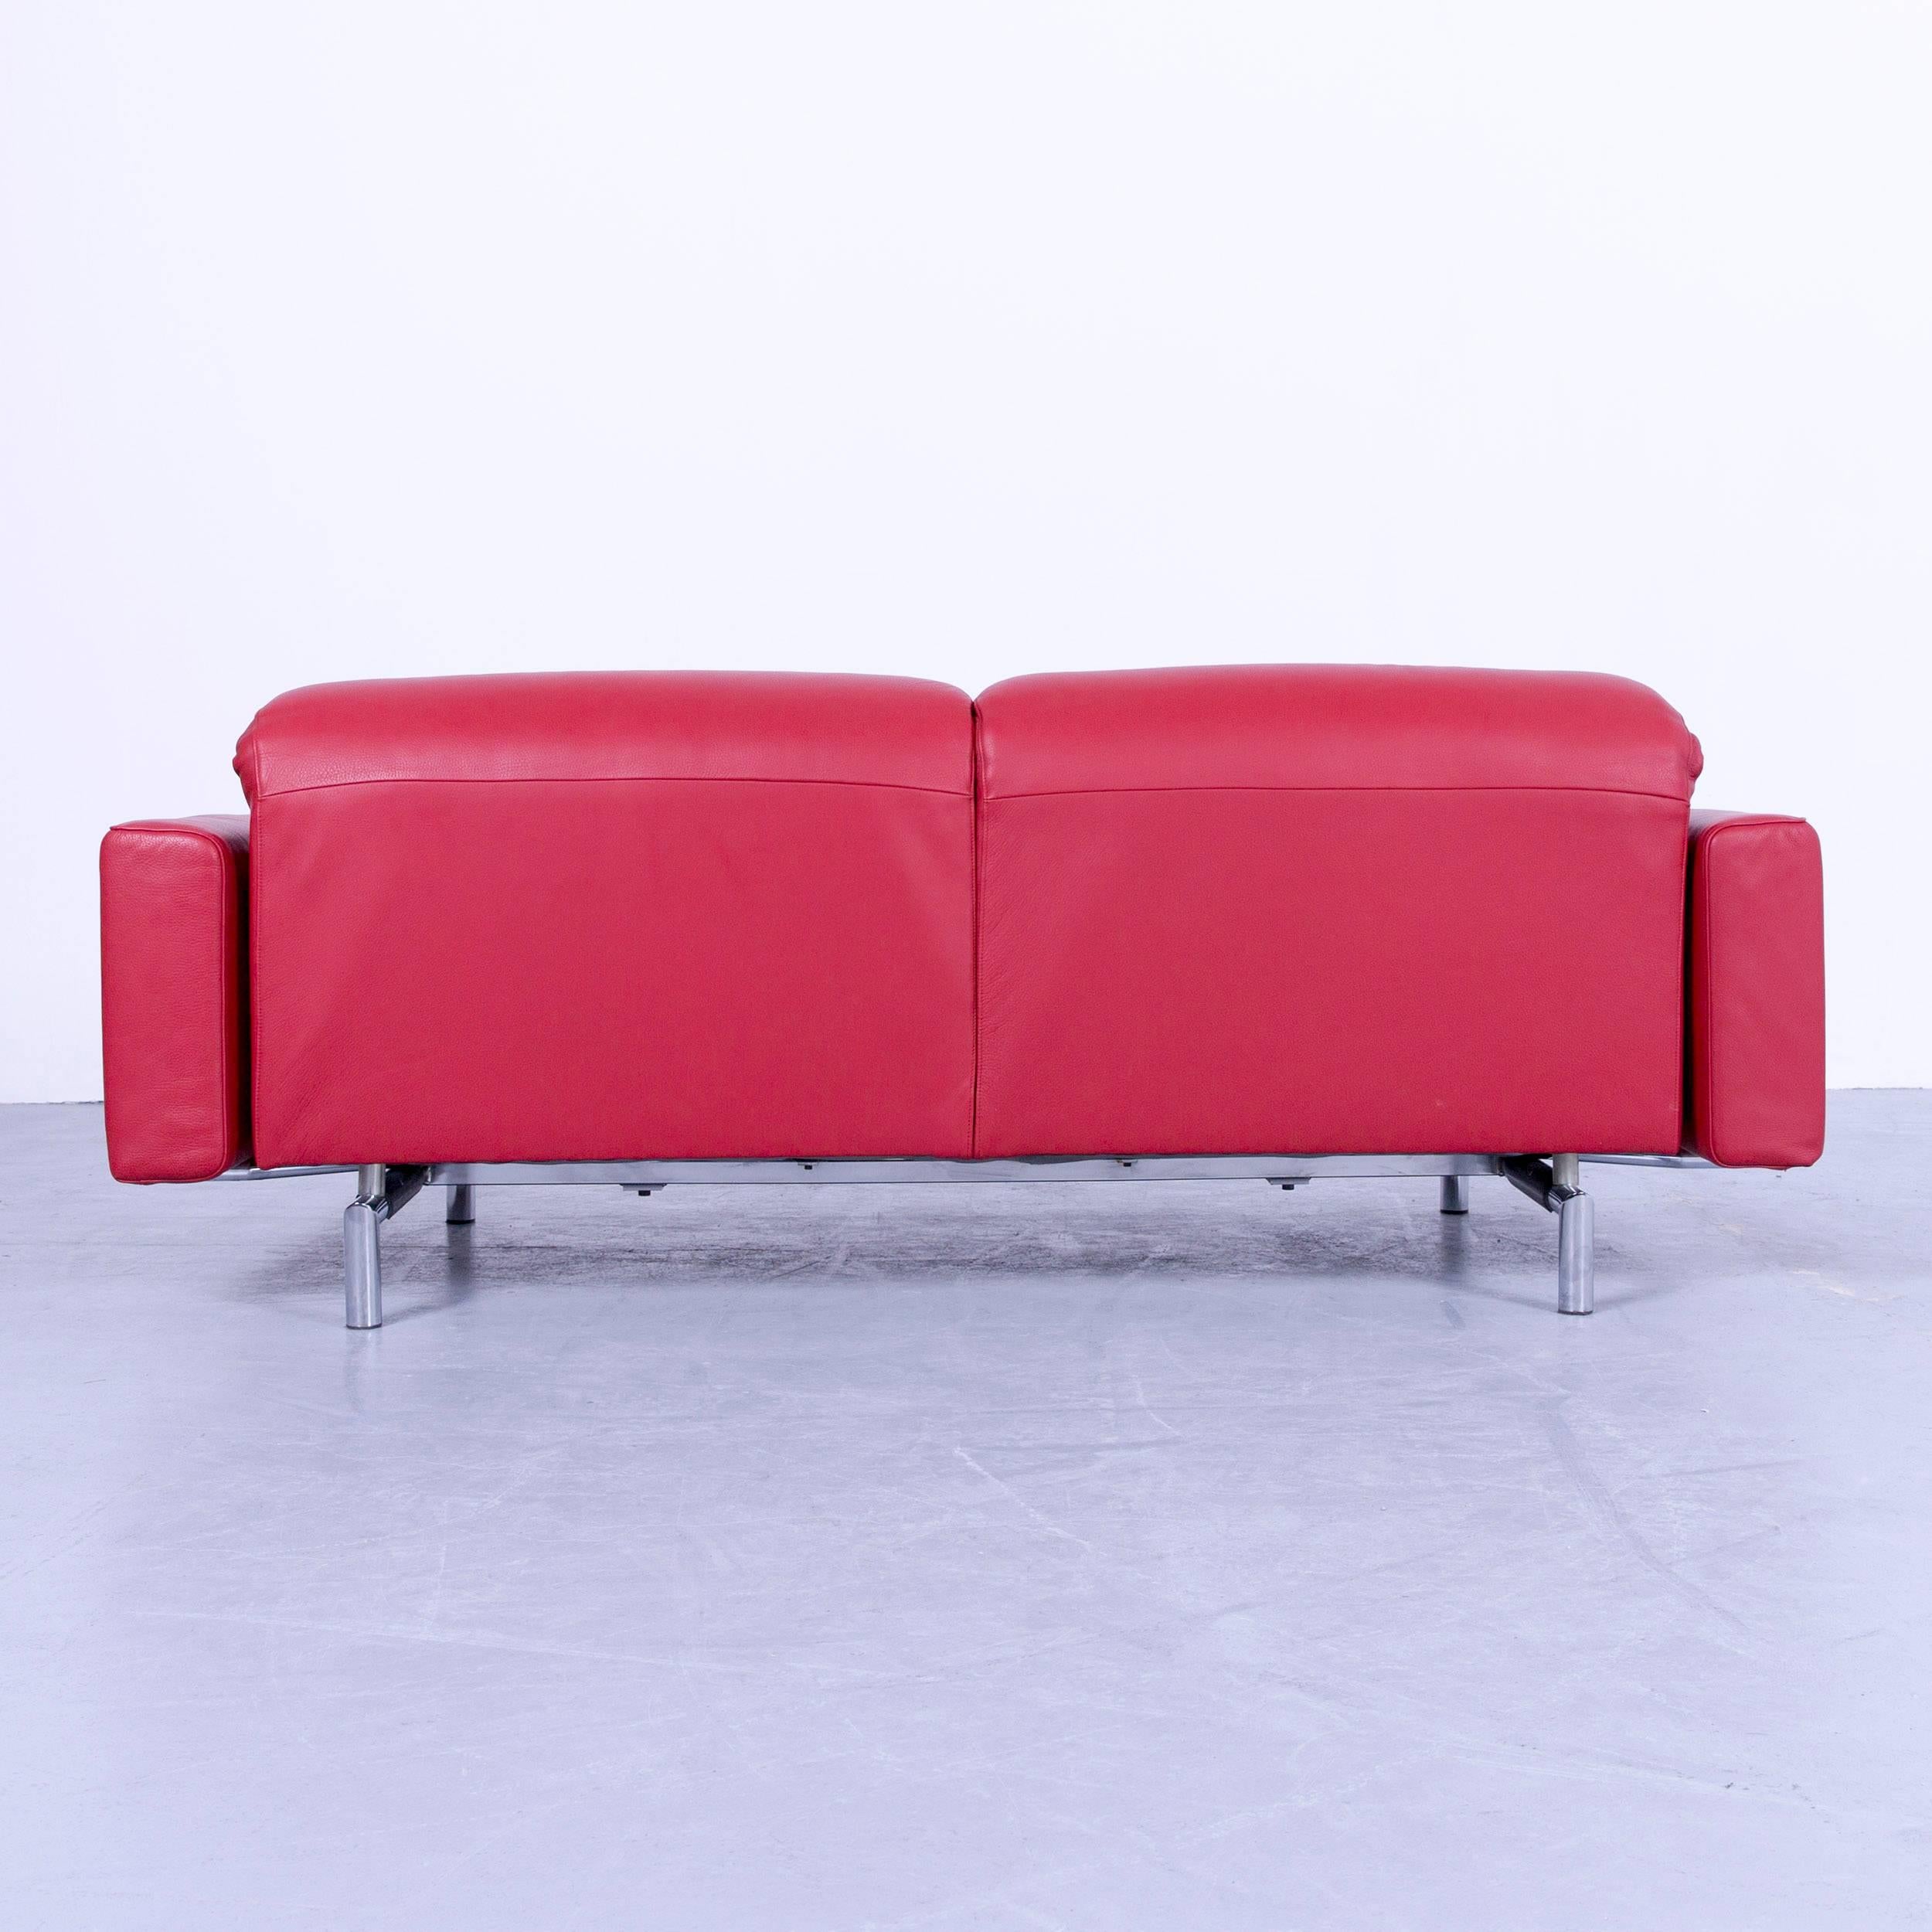 Strässle Matteo Designer Sofa Leather Red Relax Function Two-Seat Modern For Sale 5